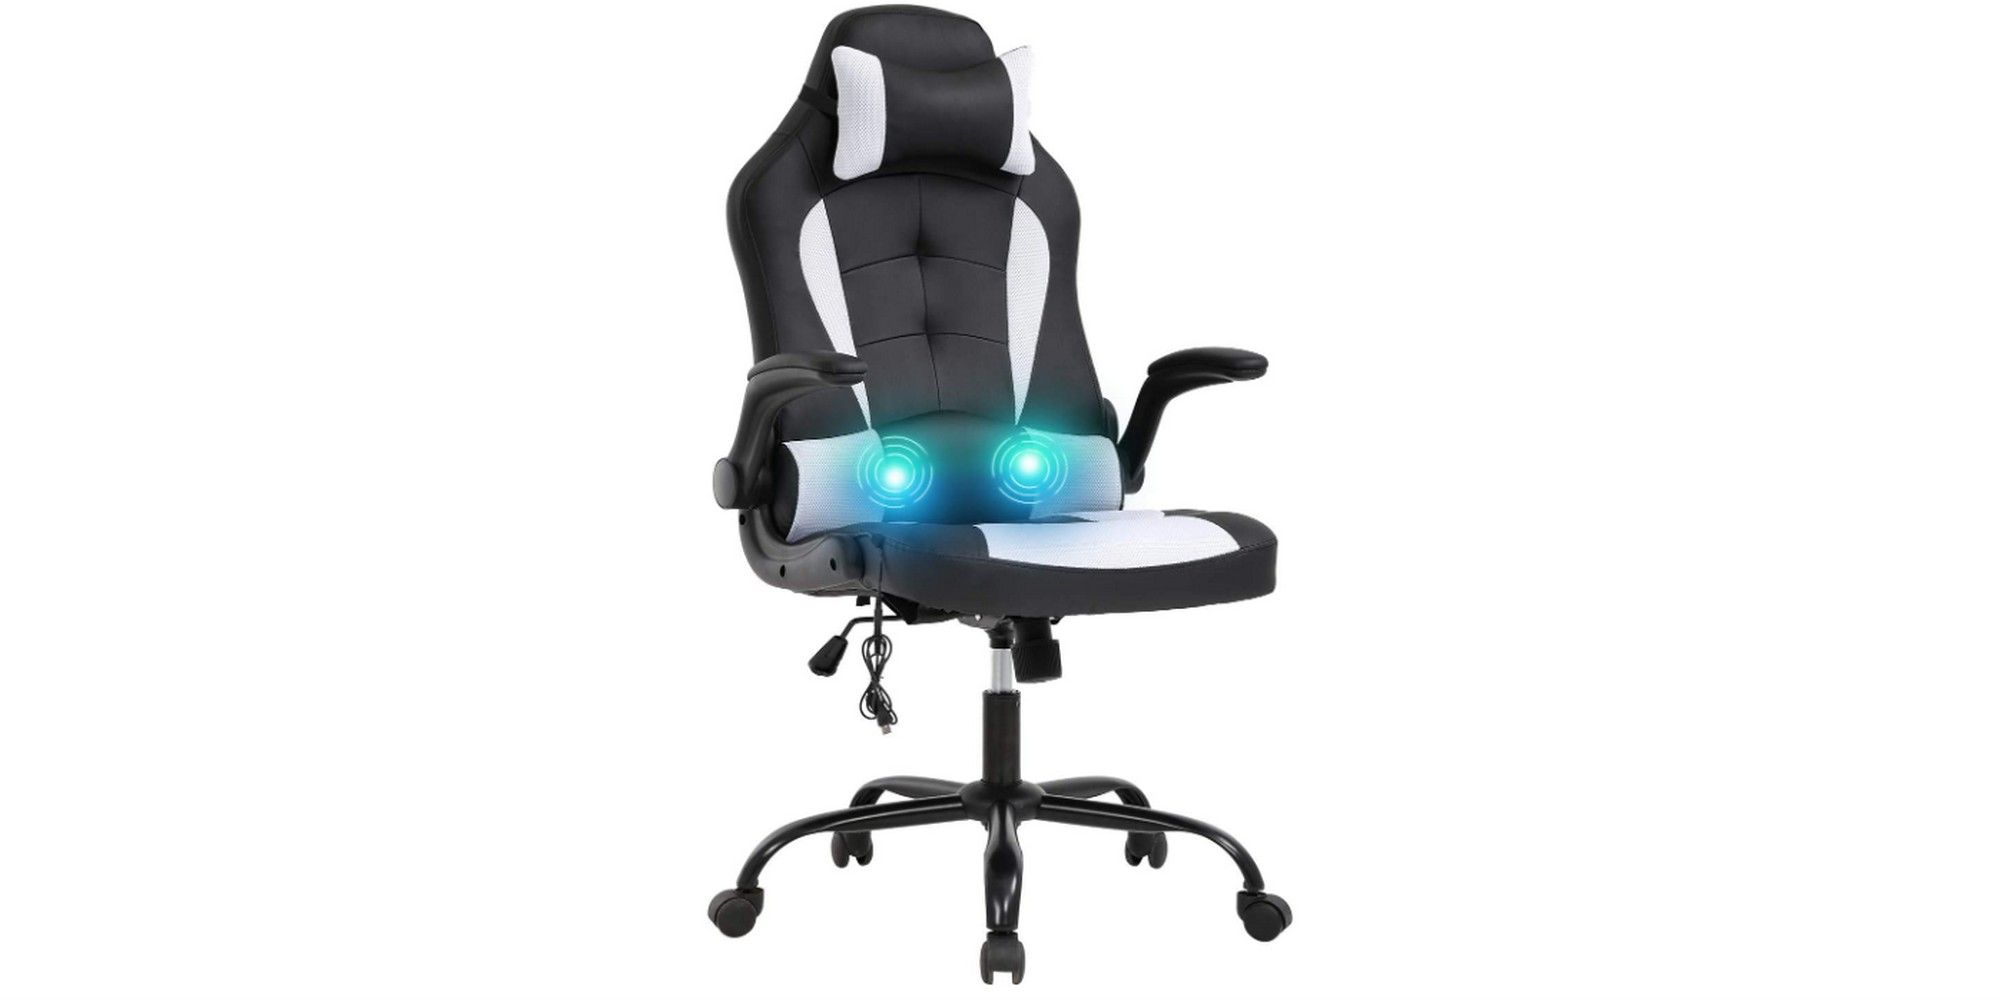 vnewone gaming office chair lumbar massager gaming chair buyer's guide